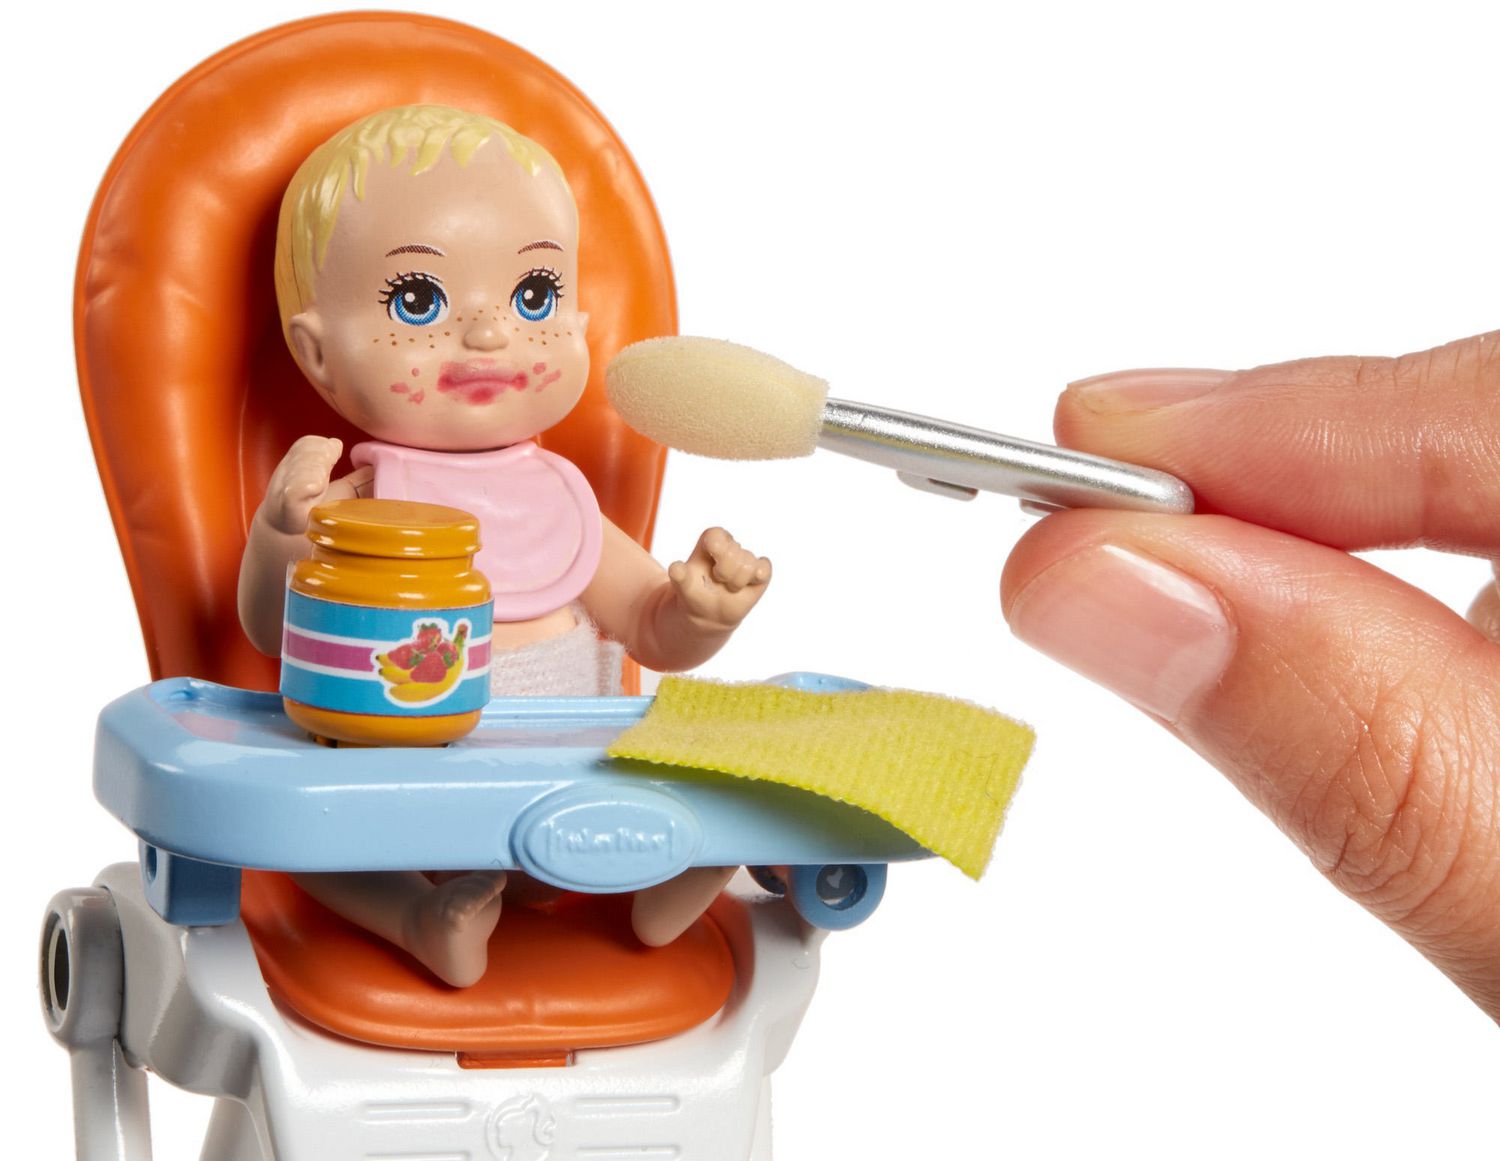 Barbie Skipper Babysitters Inc. High Chair And Play Pen Playset